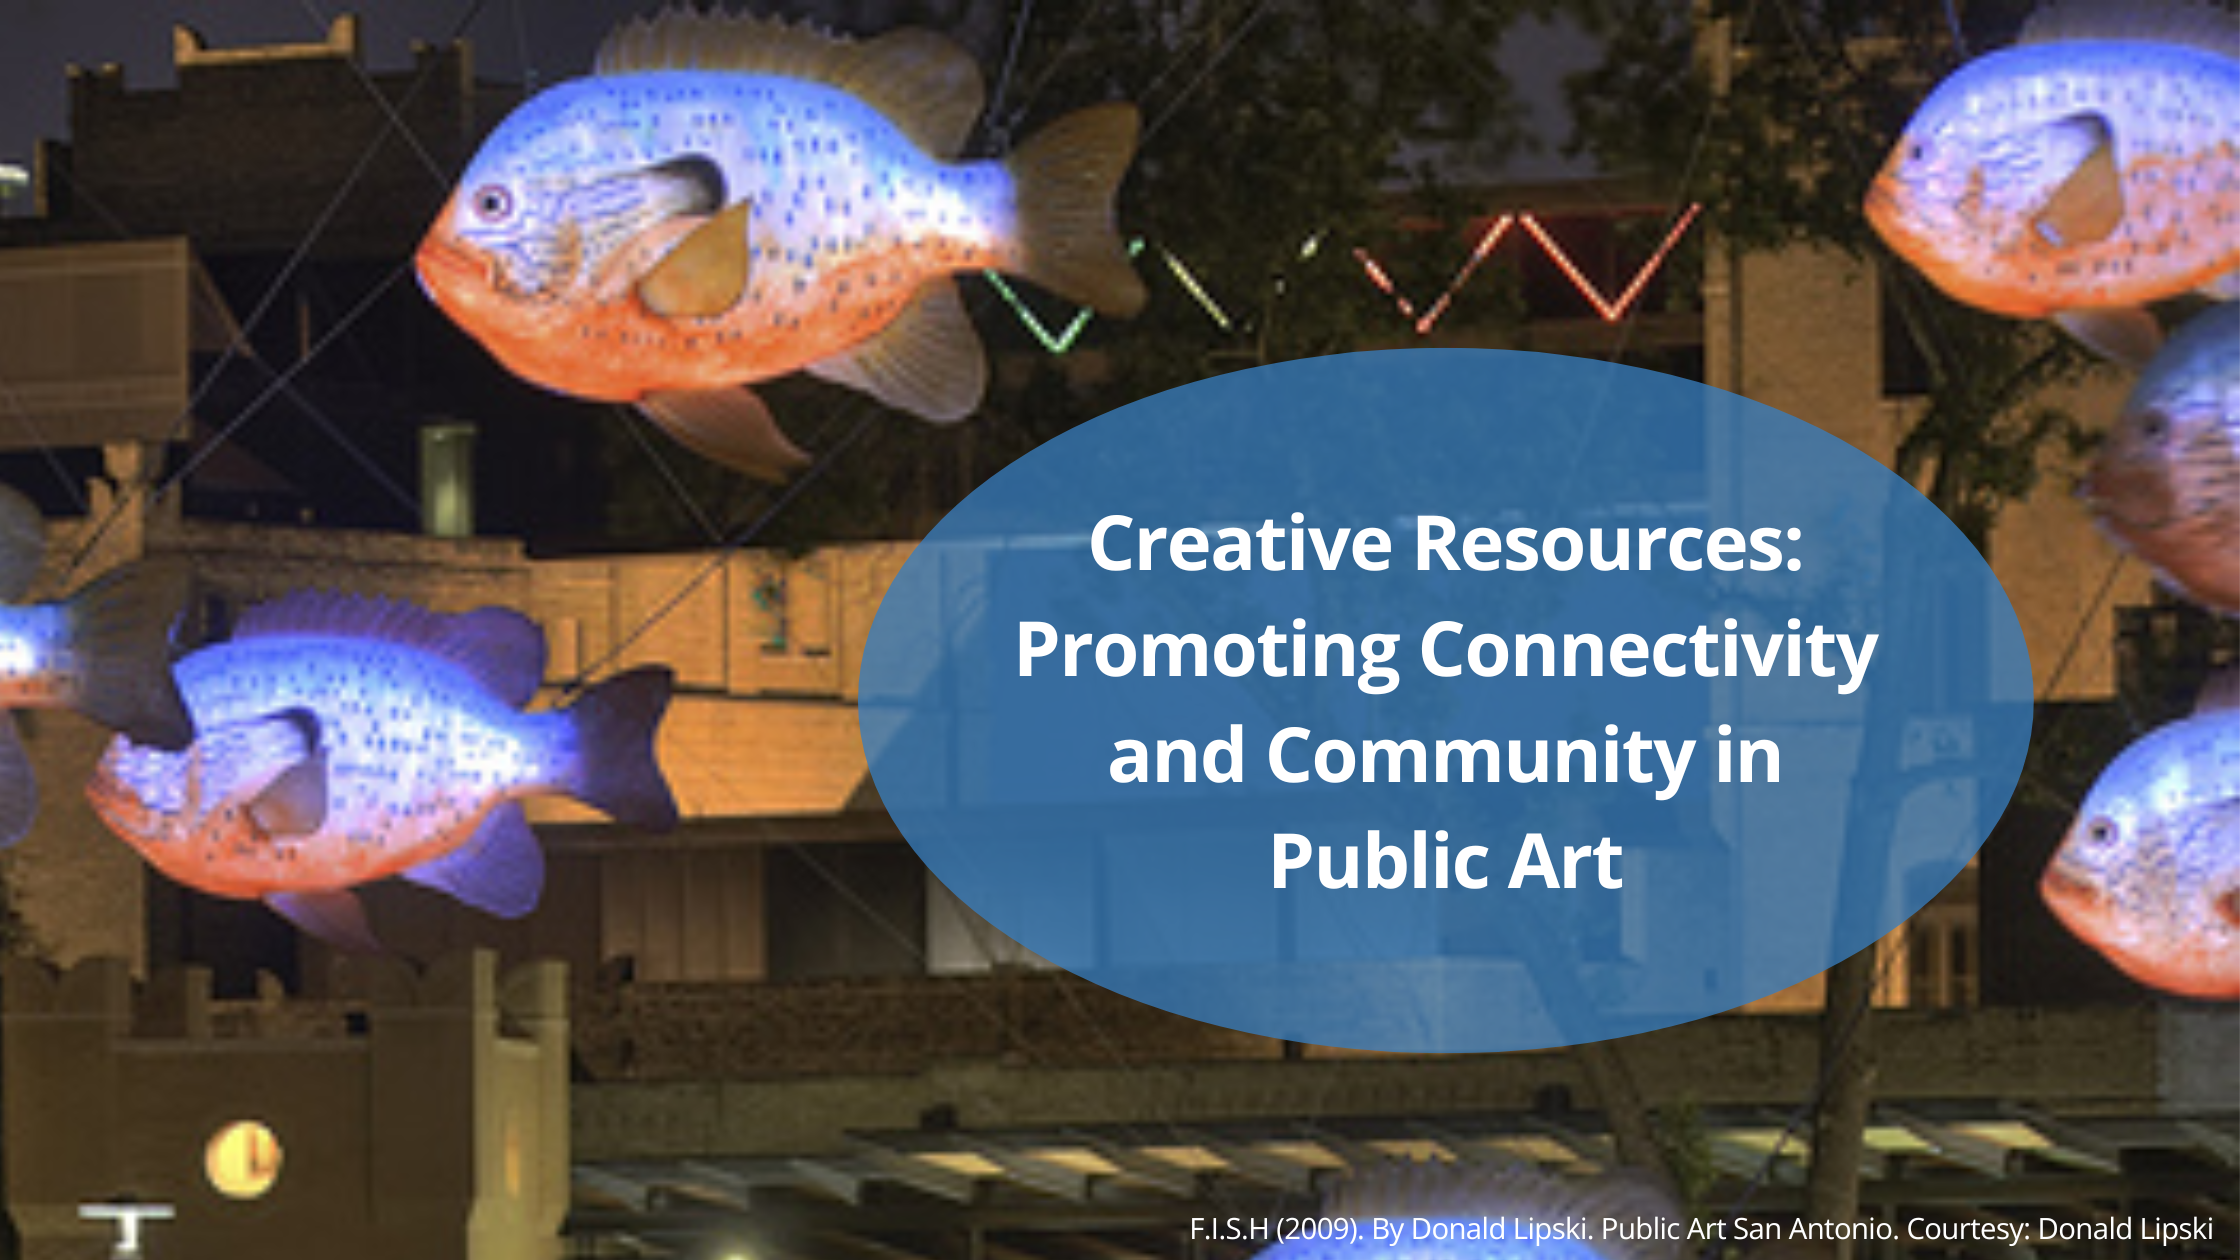 A bunch of colorful fish with a dark blue oval placed on top that says Creative Resources: Promoting Connectivity and Community in Public Art